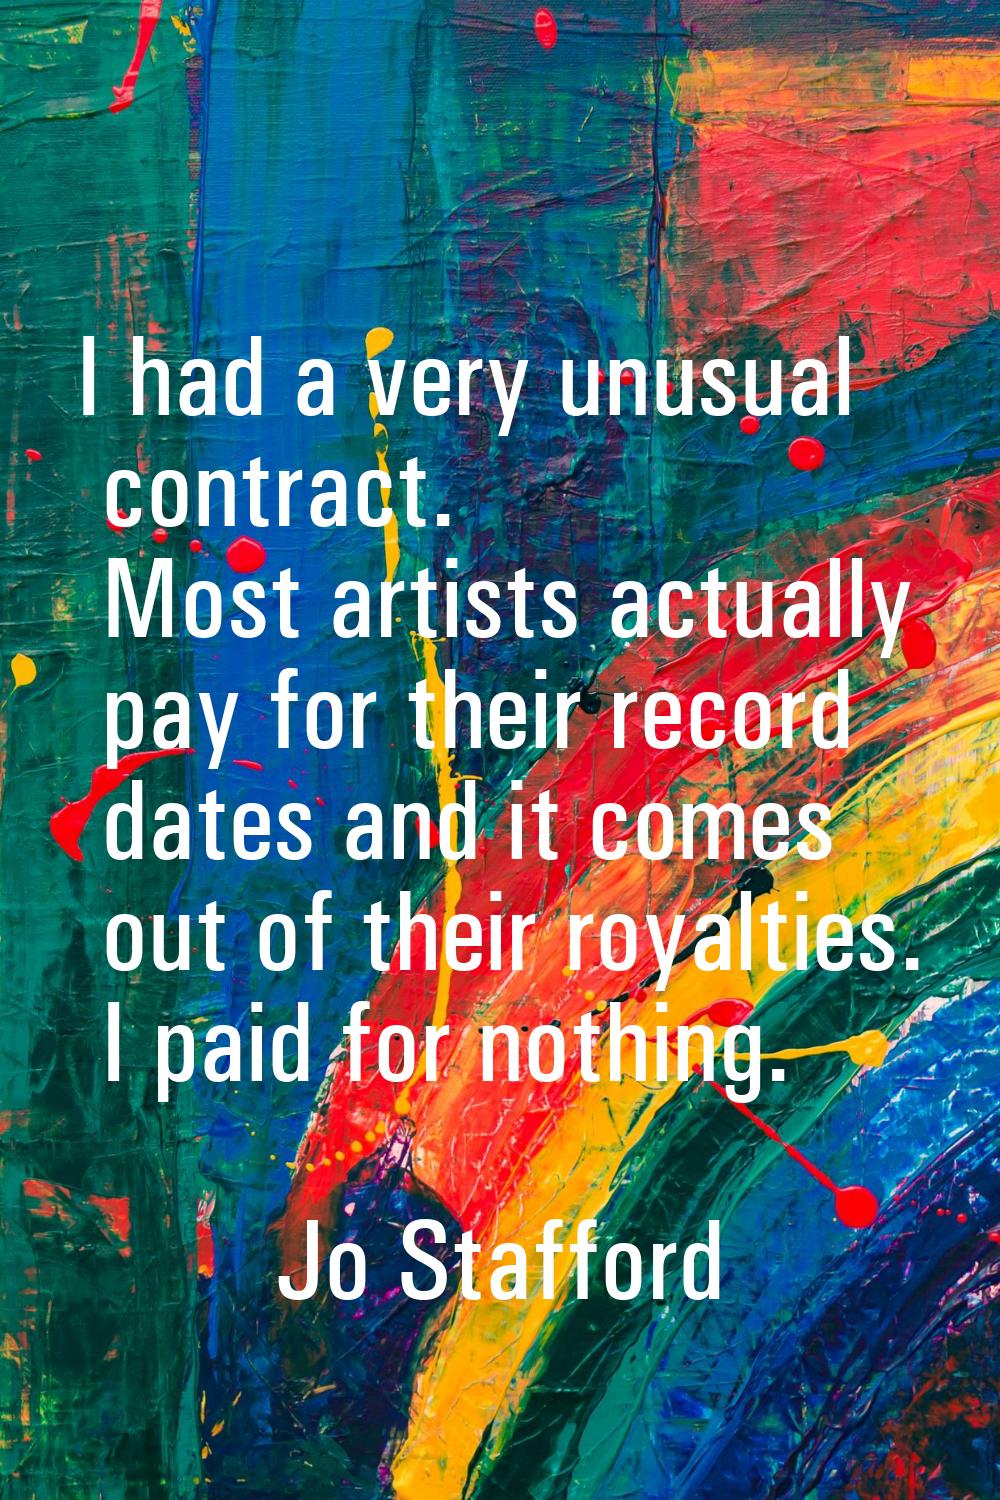 I had a very unusual contract. Most artists actually pay for their record dates and it comes out of